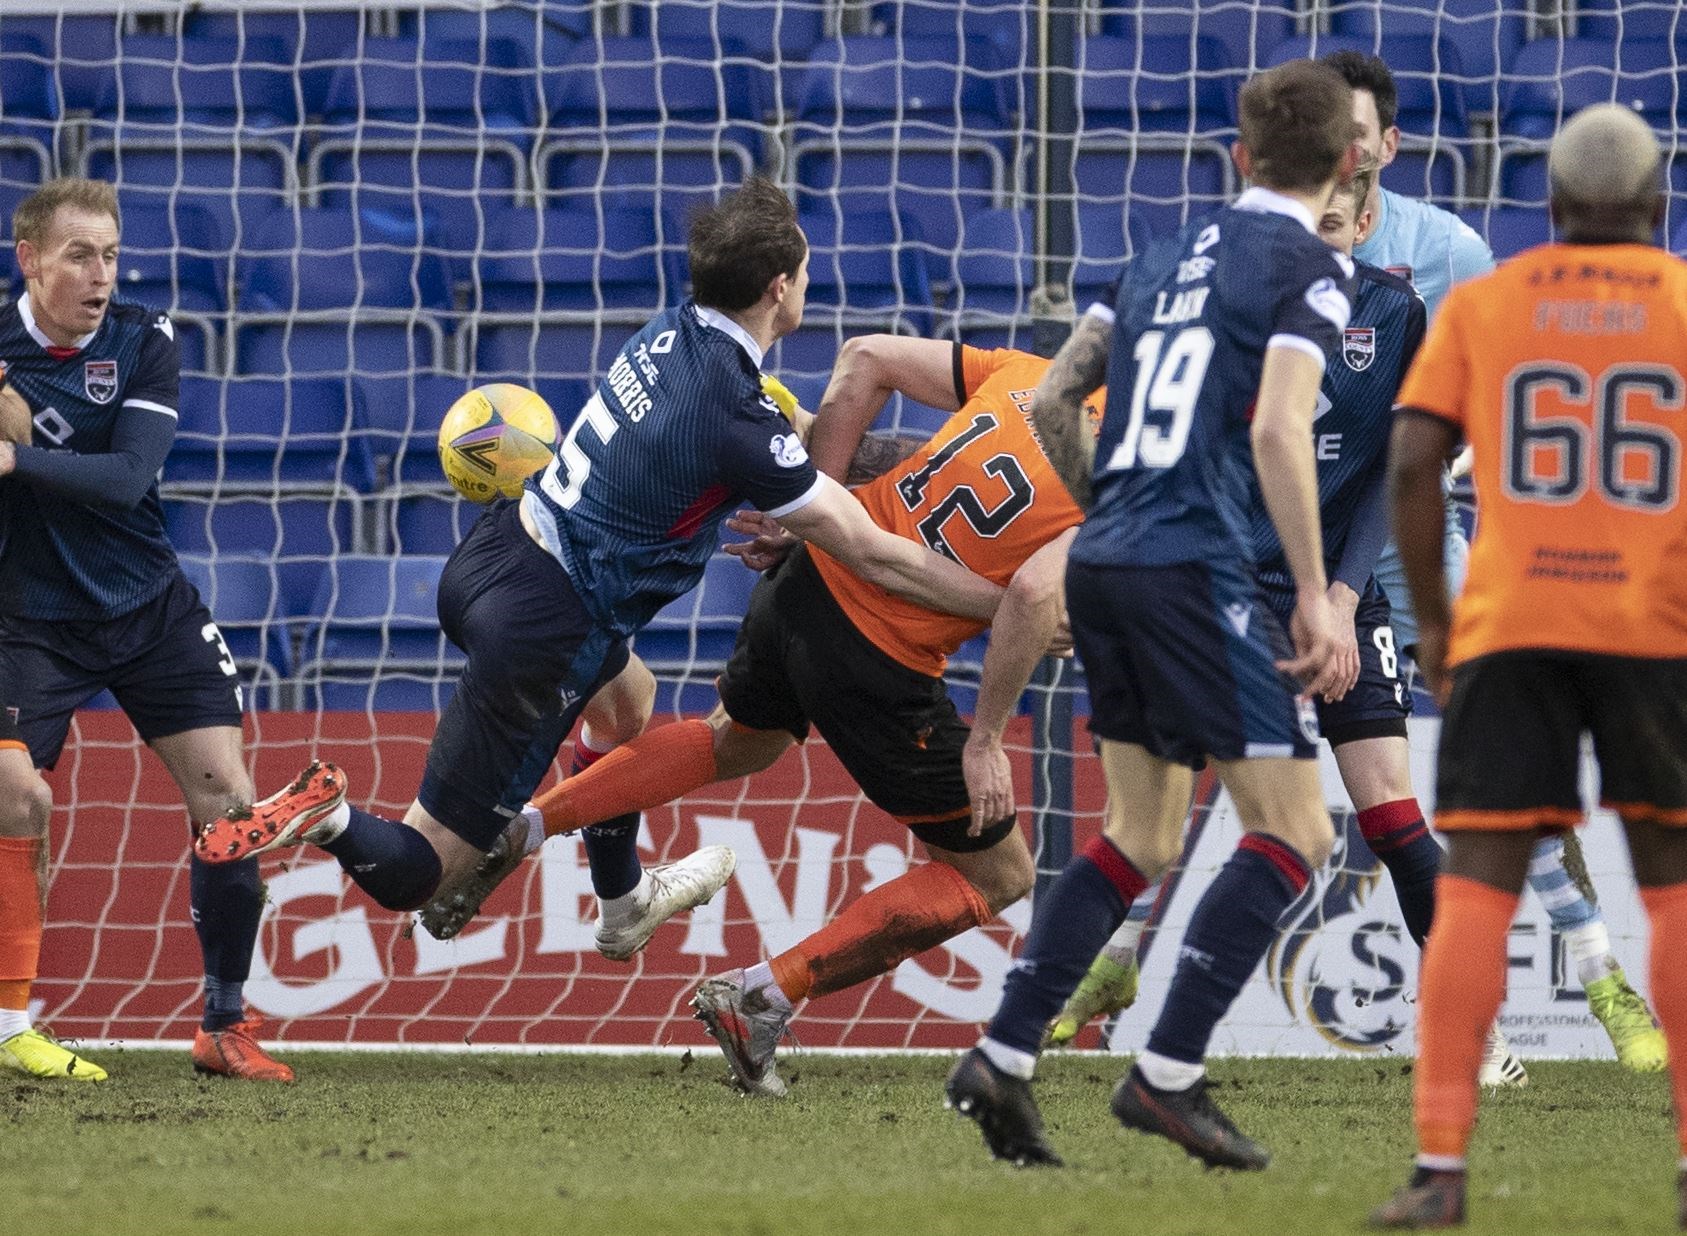 Picture - Ken Macpherson, Inverness. Ross County(0) v Dundee Utd(2). 06/02/21. Dundee Utd's Ryan Edwards heads in 2nd goal.